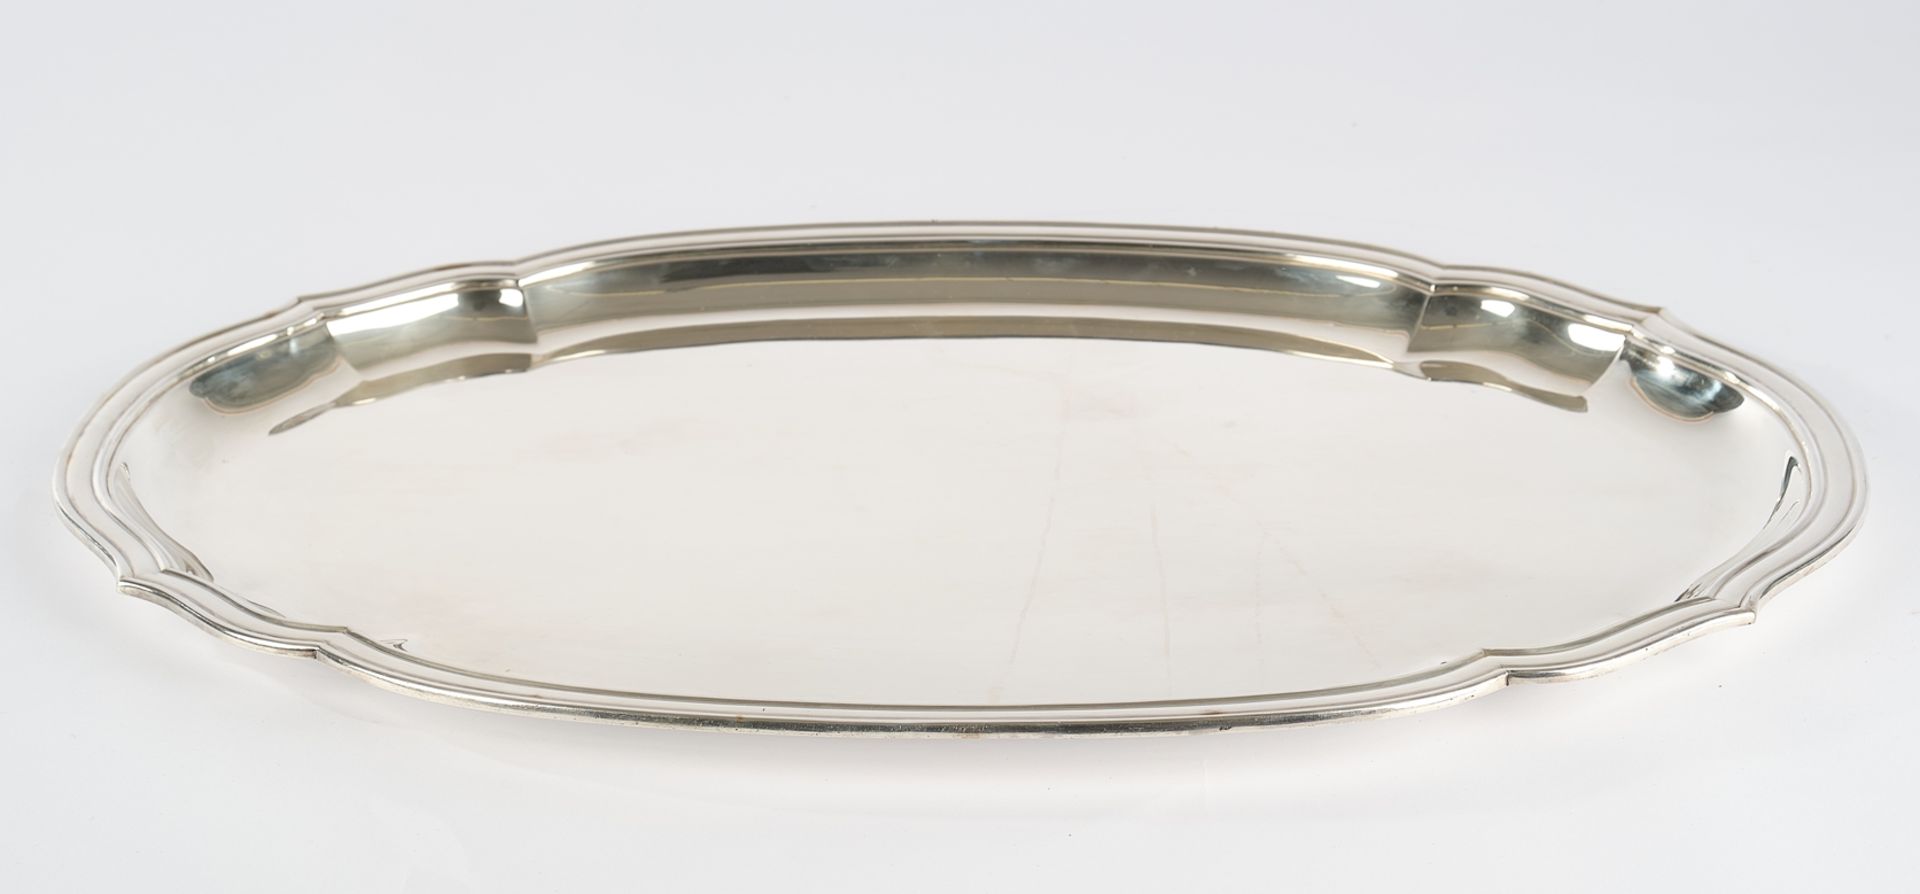 Tablet, silver 950, France, oval, curved, moulded rim, smooth mirror, 57 x 36.5 cm, approx. 2,024 g